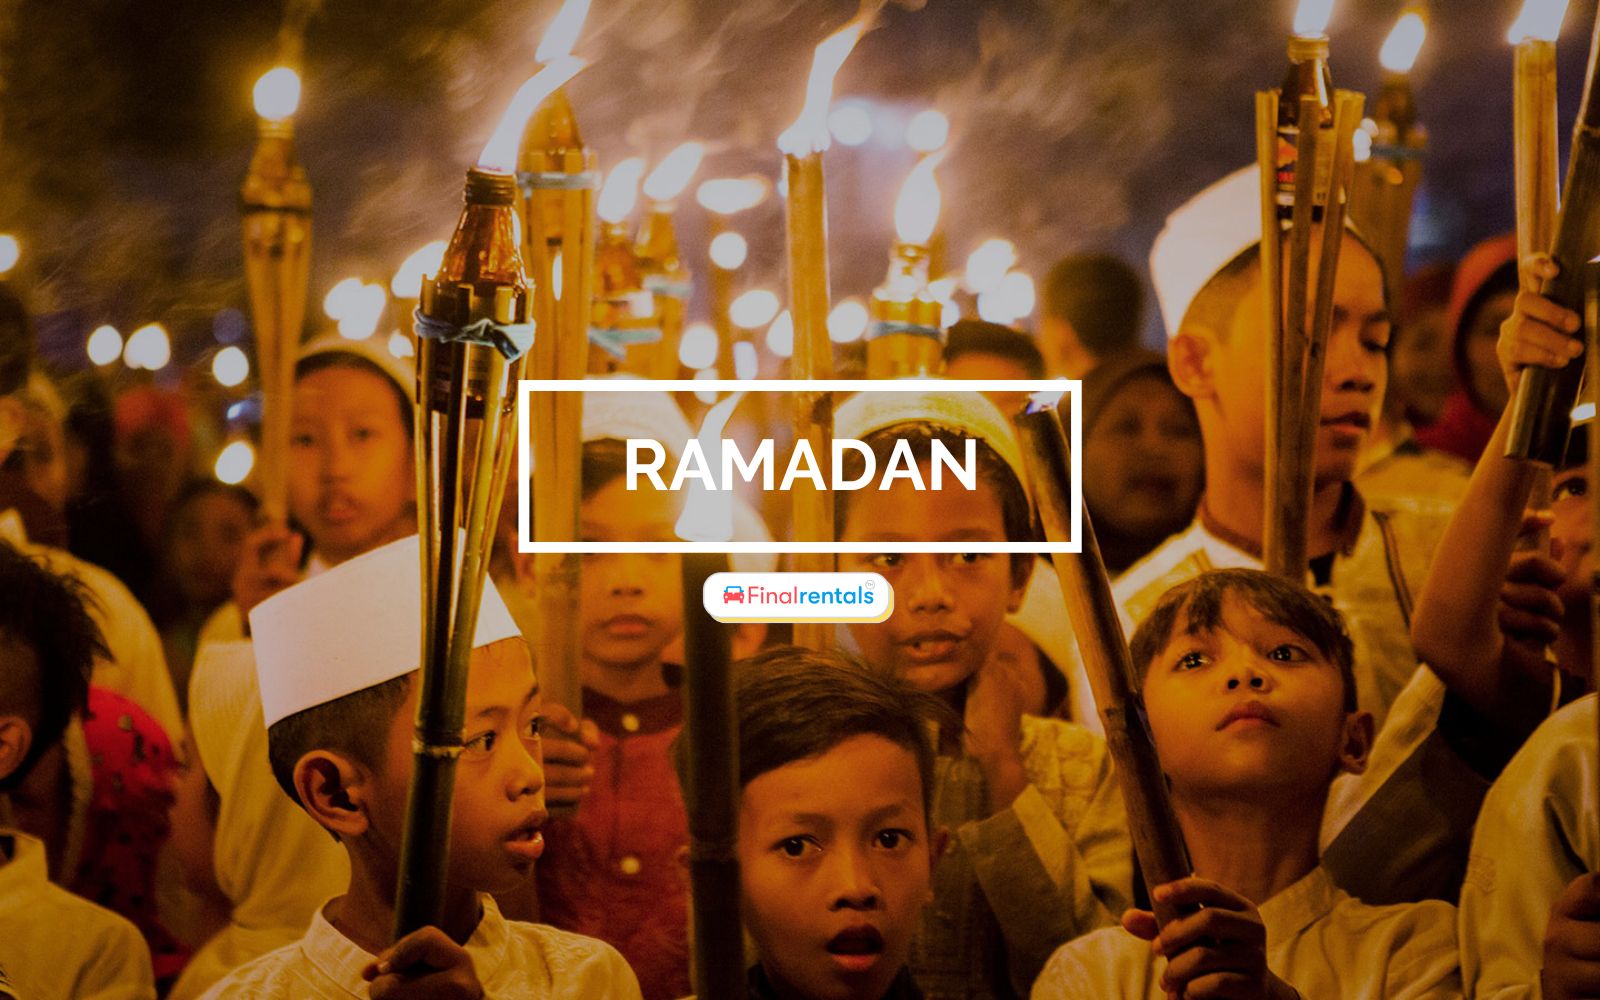 Ramadan Tips and The Best Iftar Meals for Ramadan